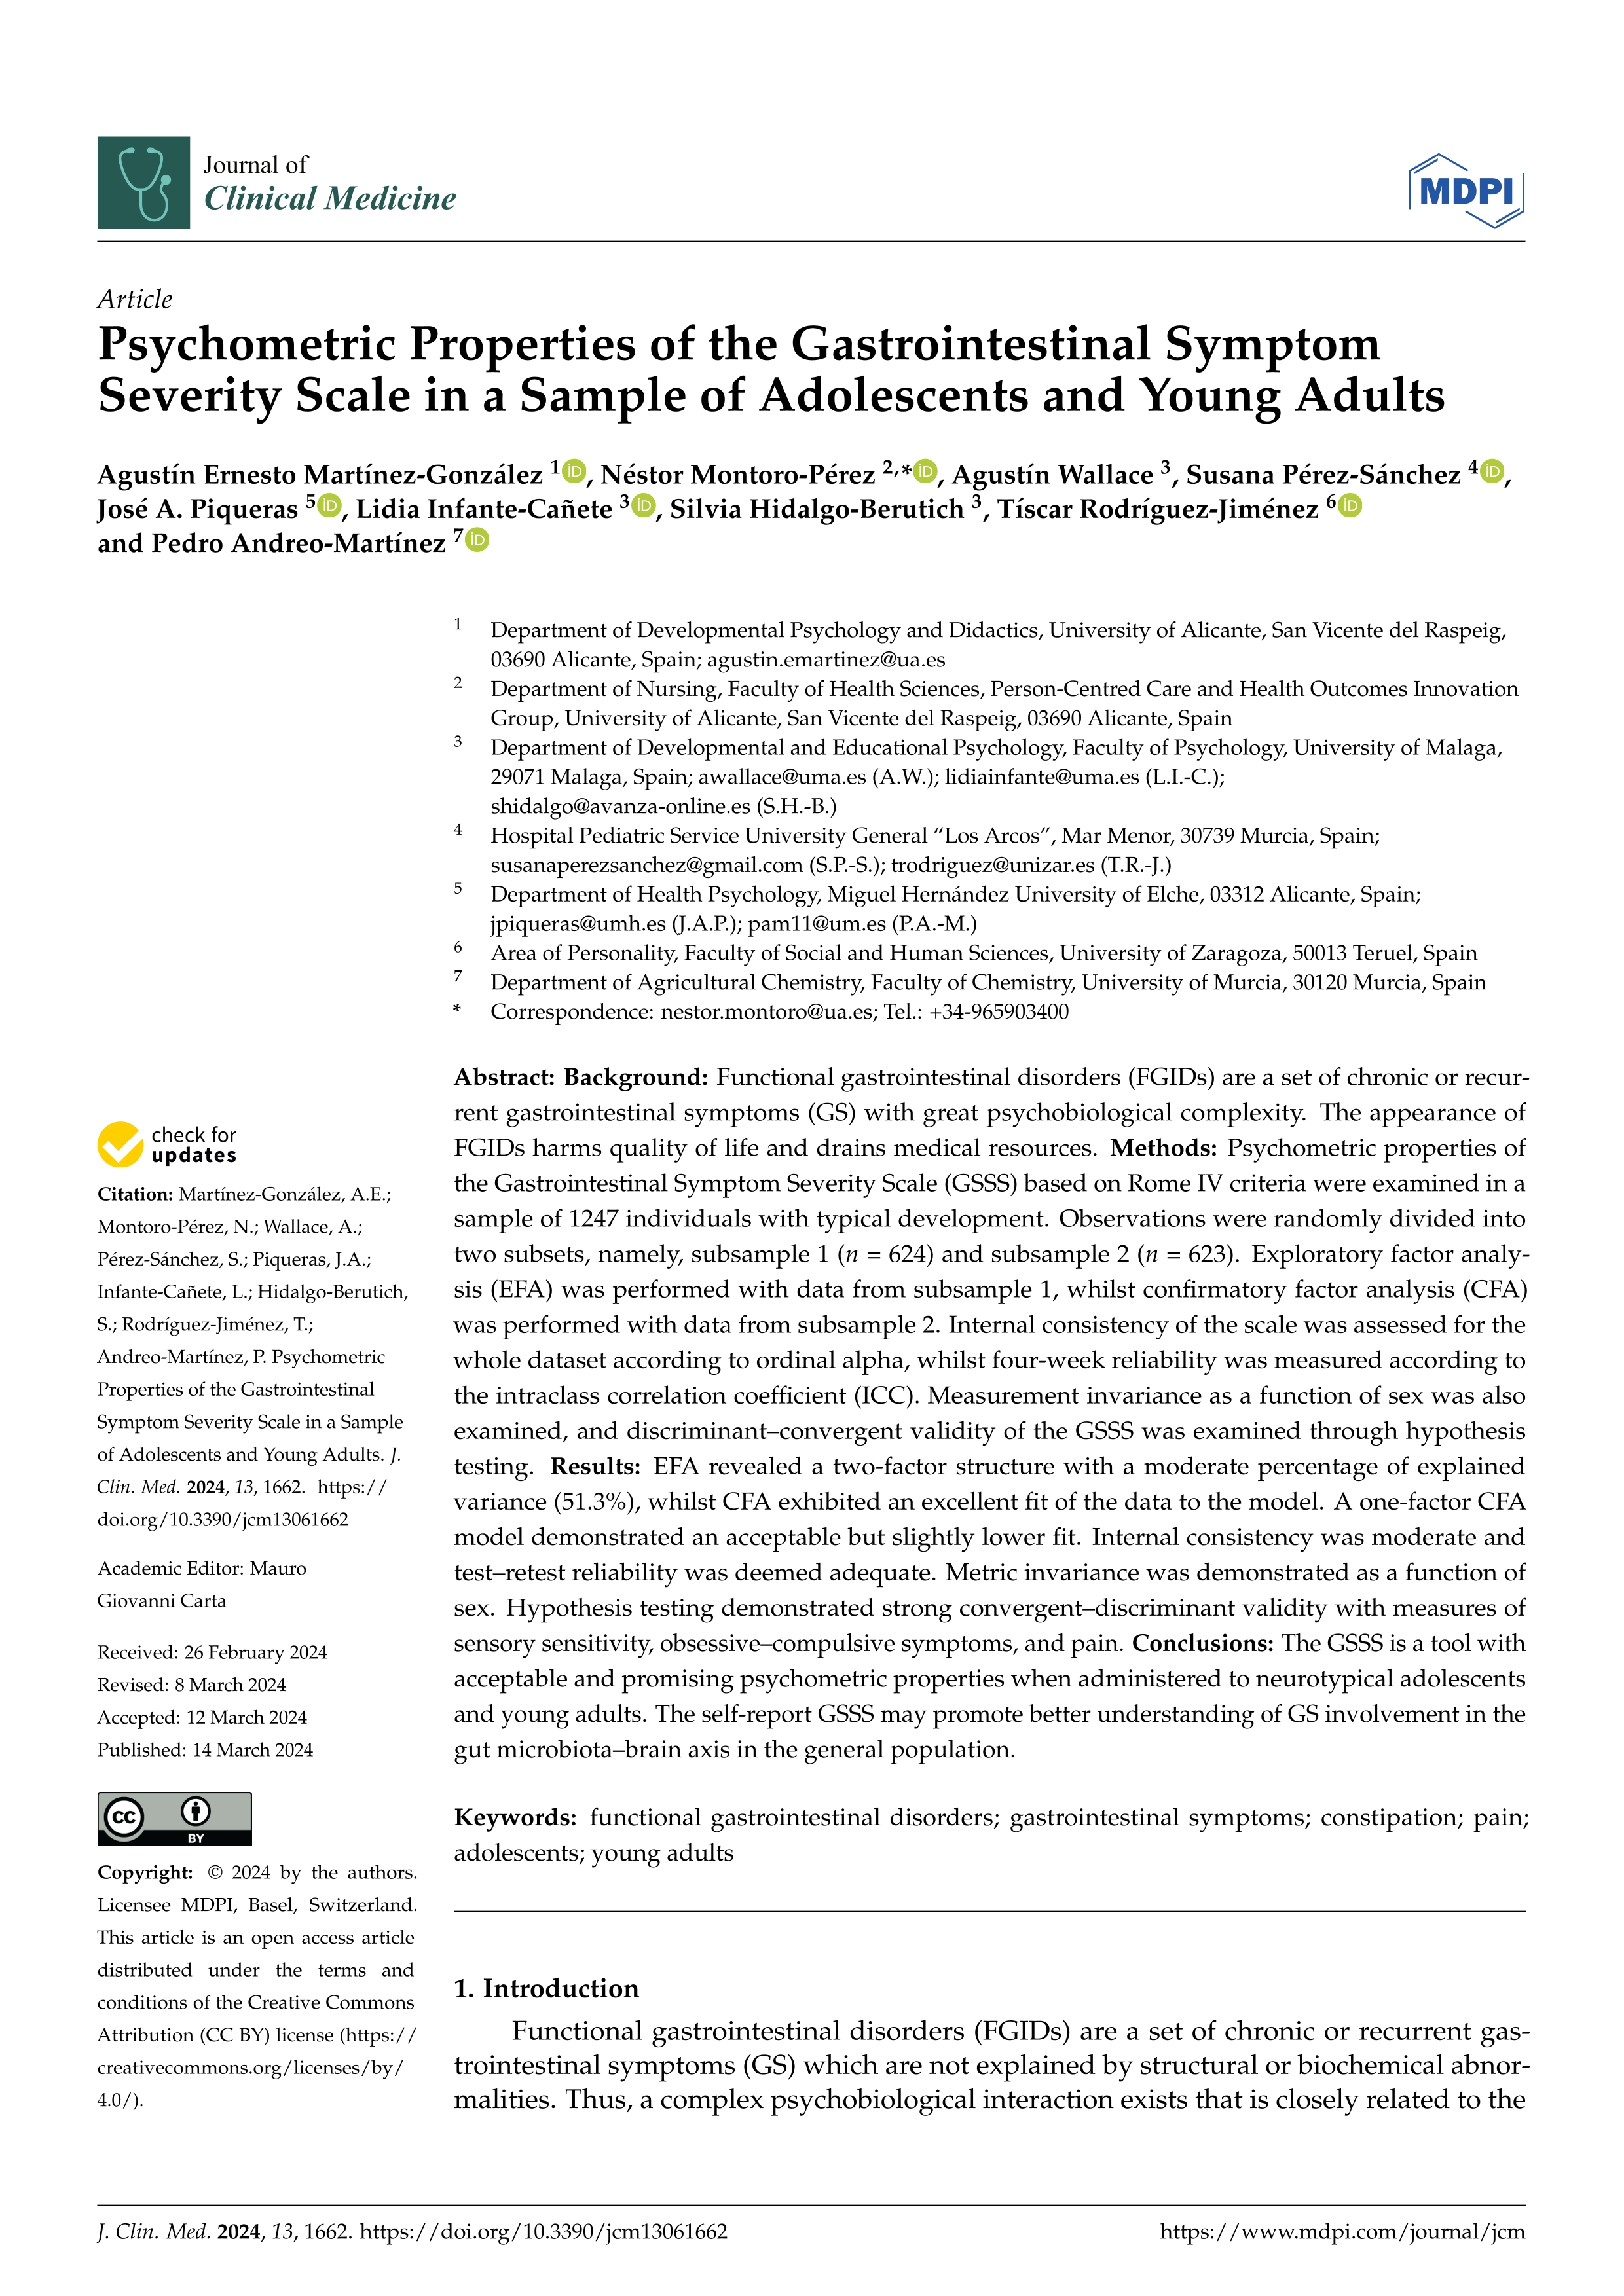 Psychometric properties of the gastrointestinal symptom severity scale in a sample of adolescents and young adults